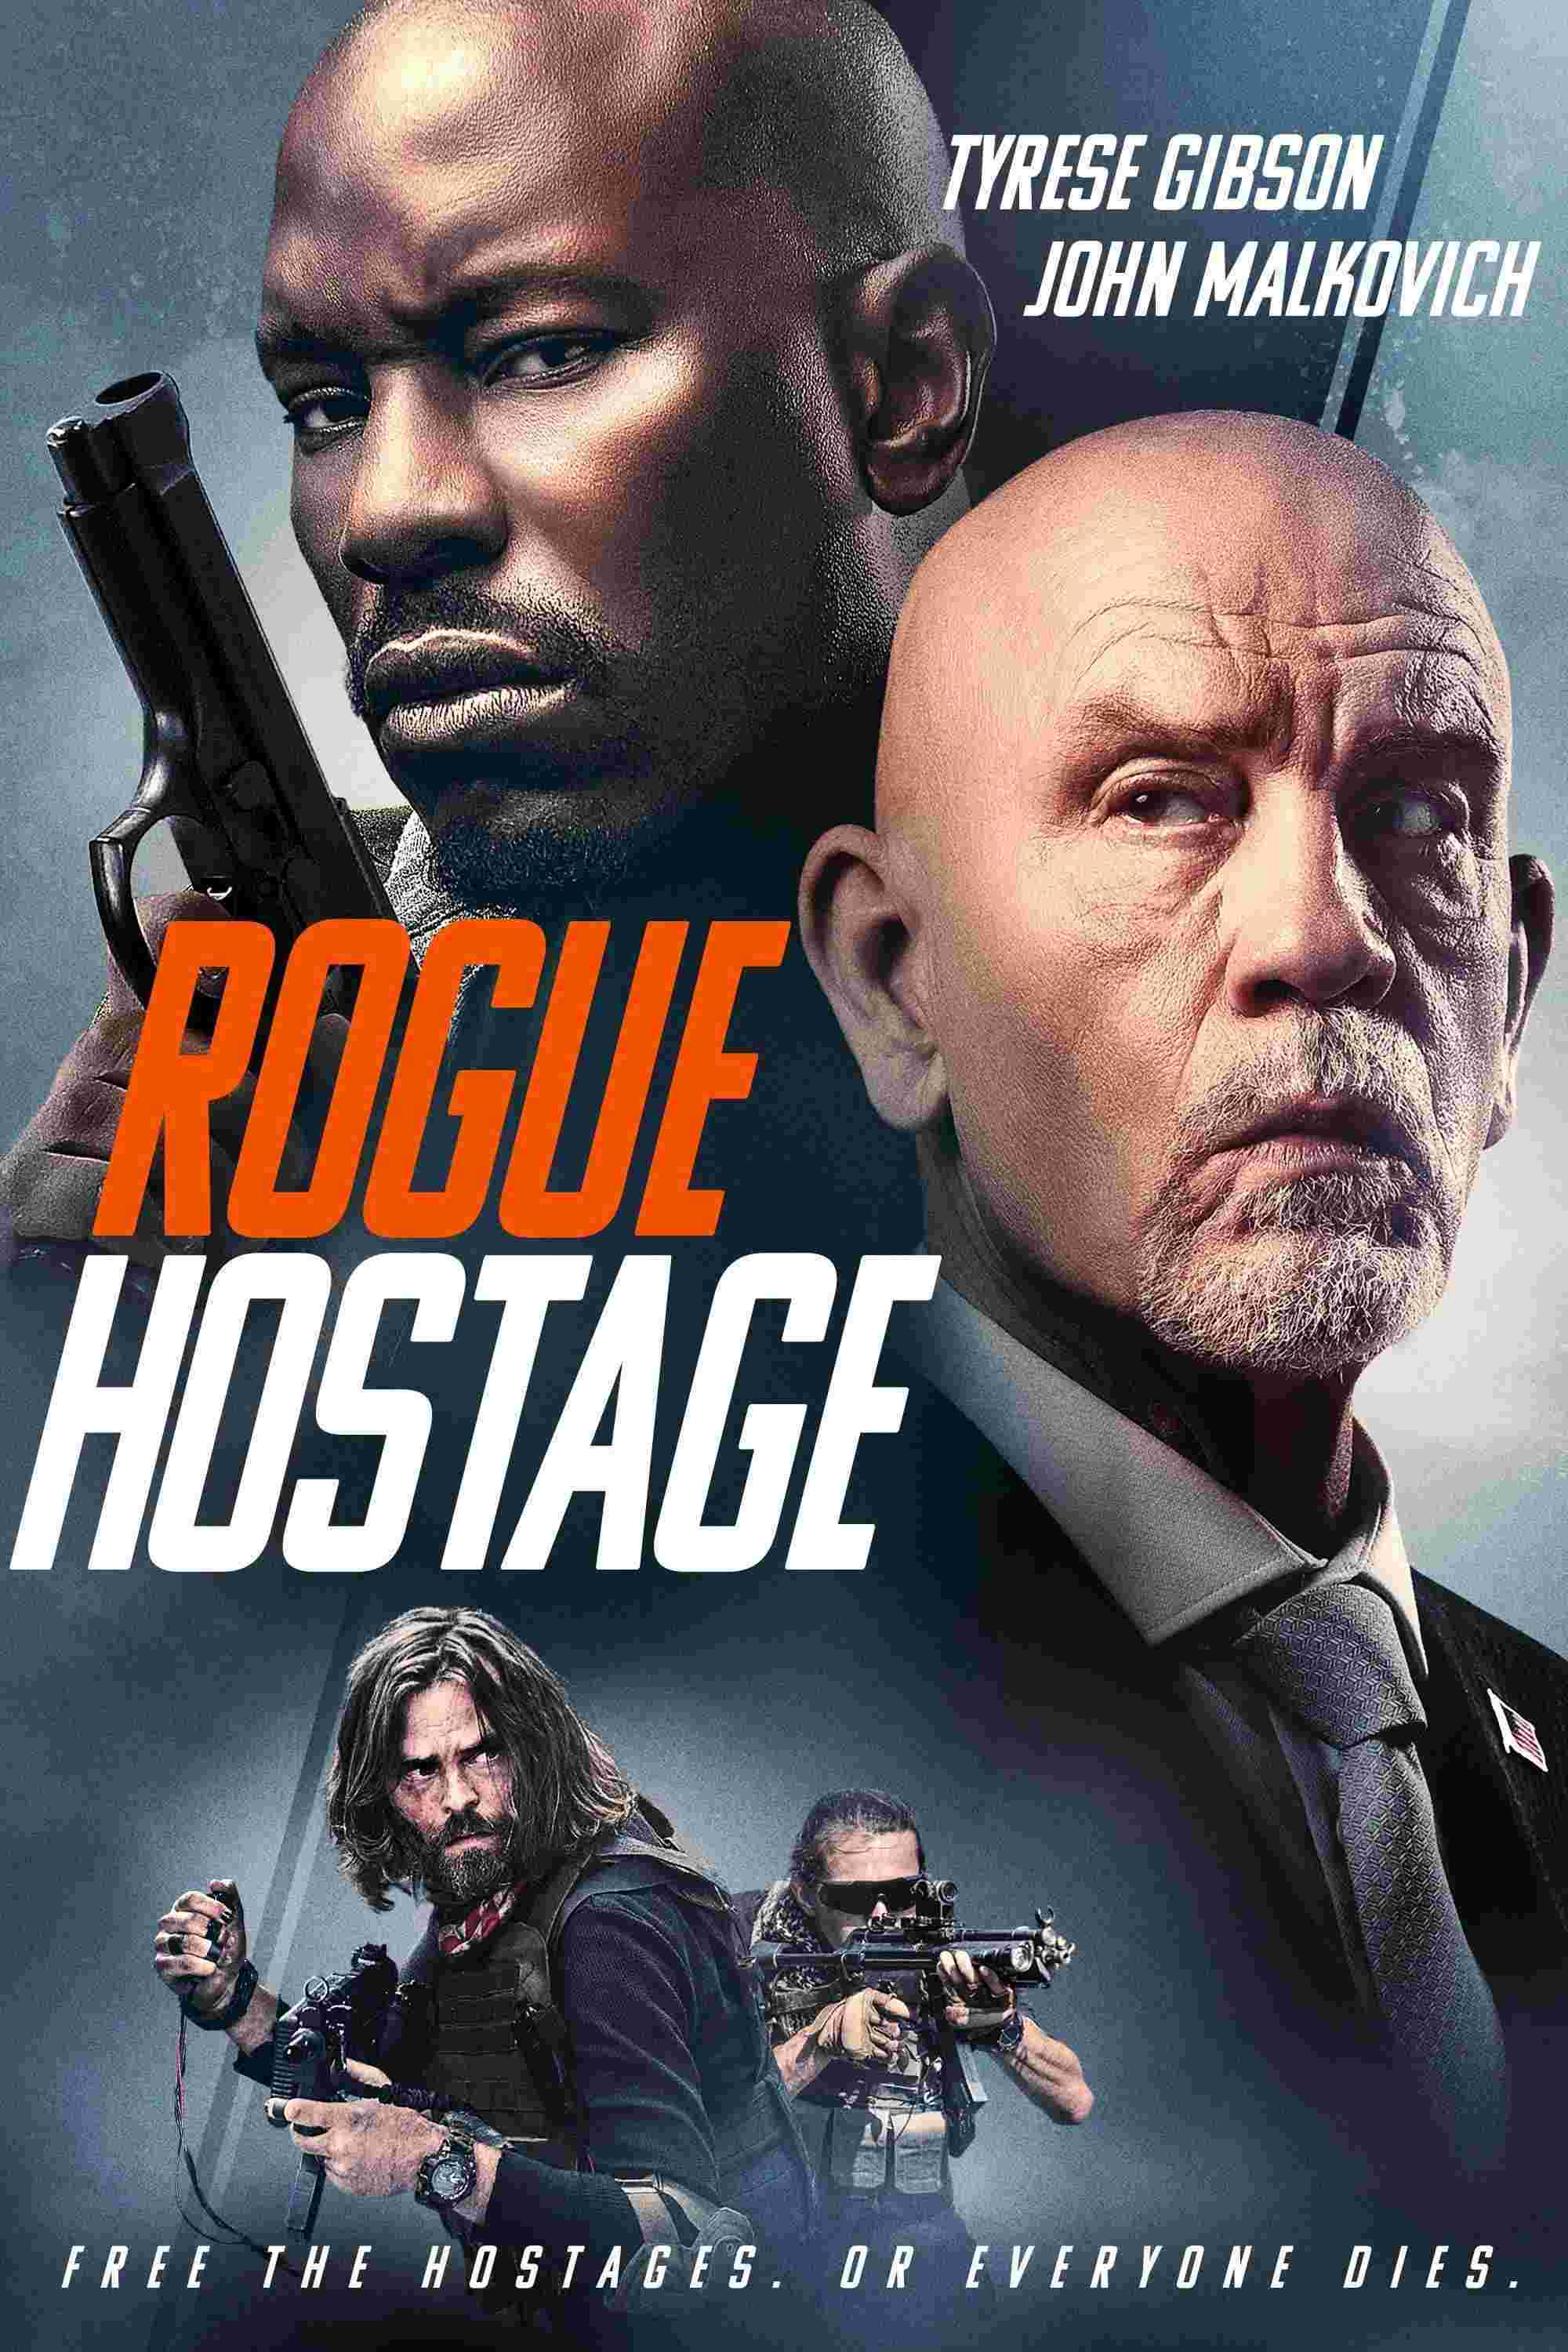 Rogue Hostage (2021) Tyrese Gibson